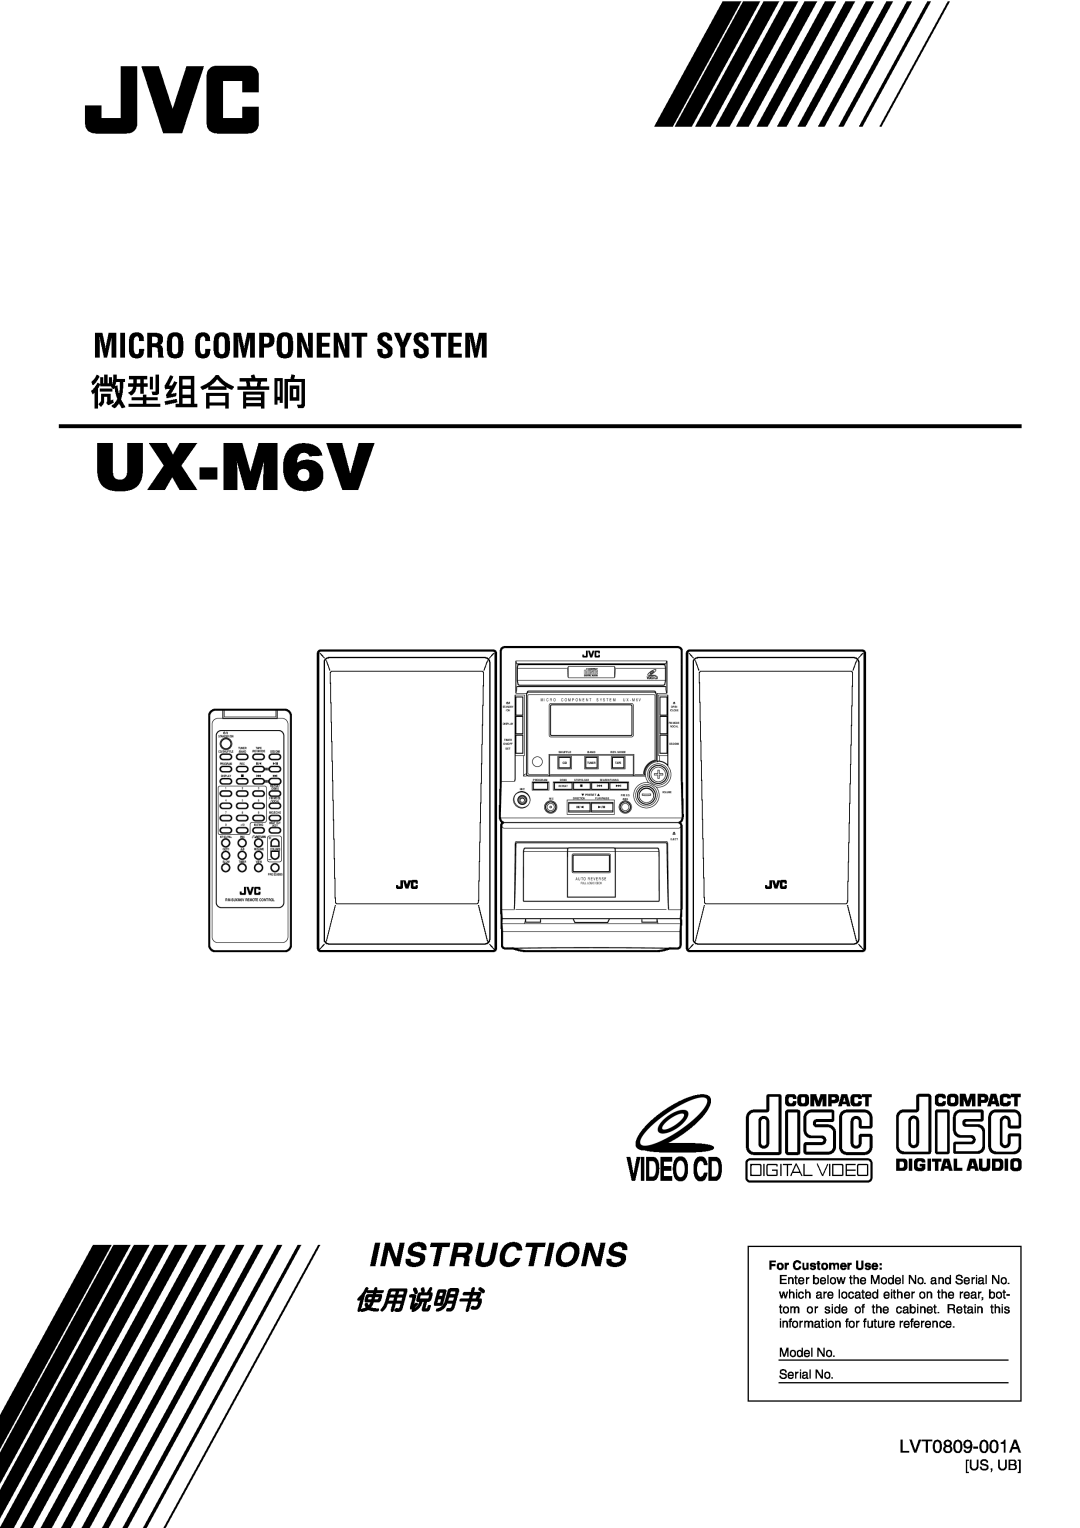 JVC UX-M6VUB manual Micro Component System, Instructions, LVT0809-001A, For Customer Use, Model No Serial No 